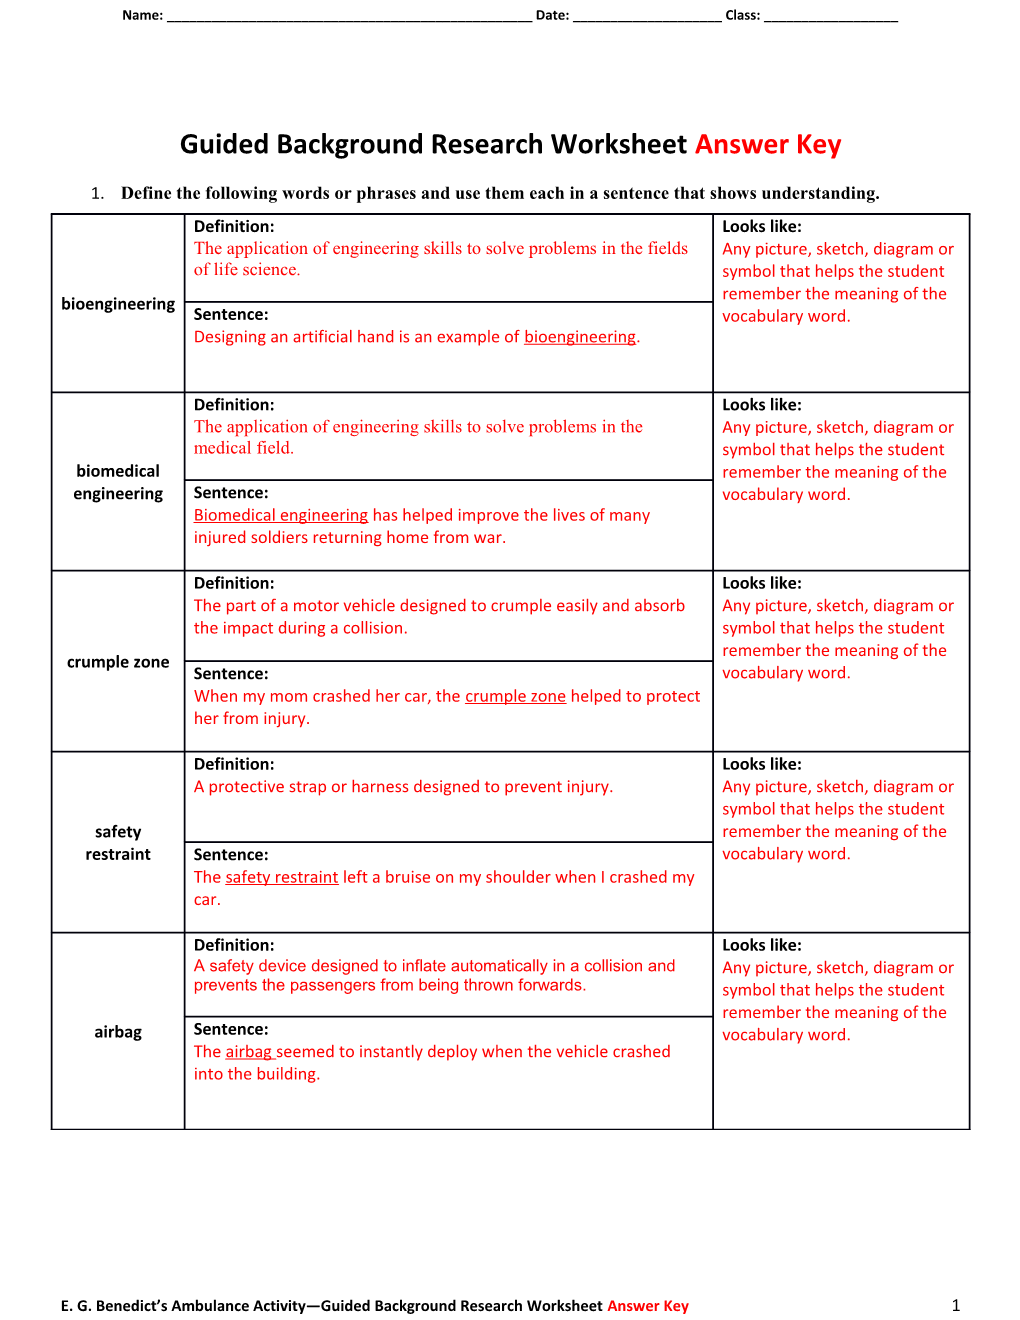 Guided Background Research Worksheet Answer Key